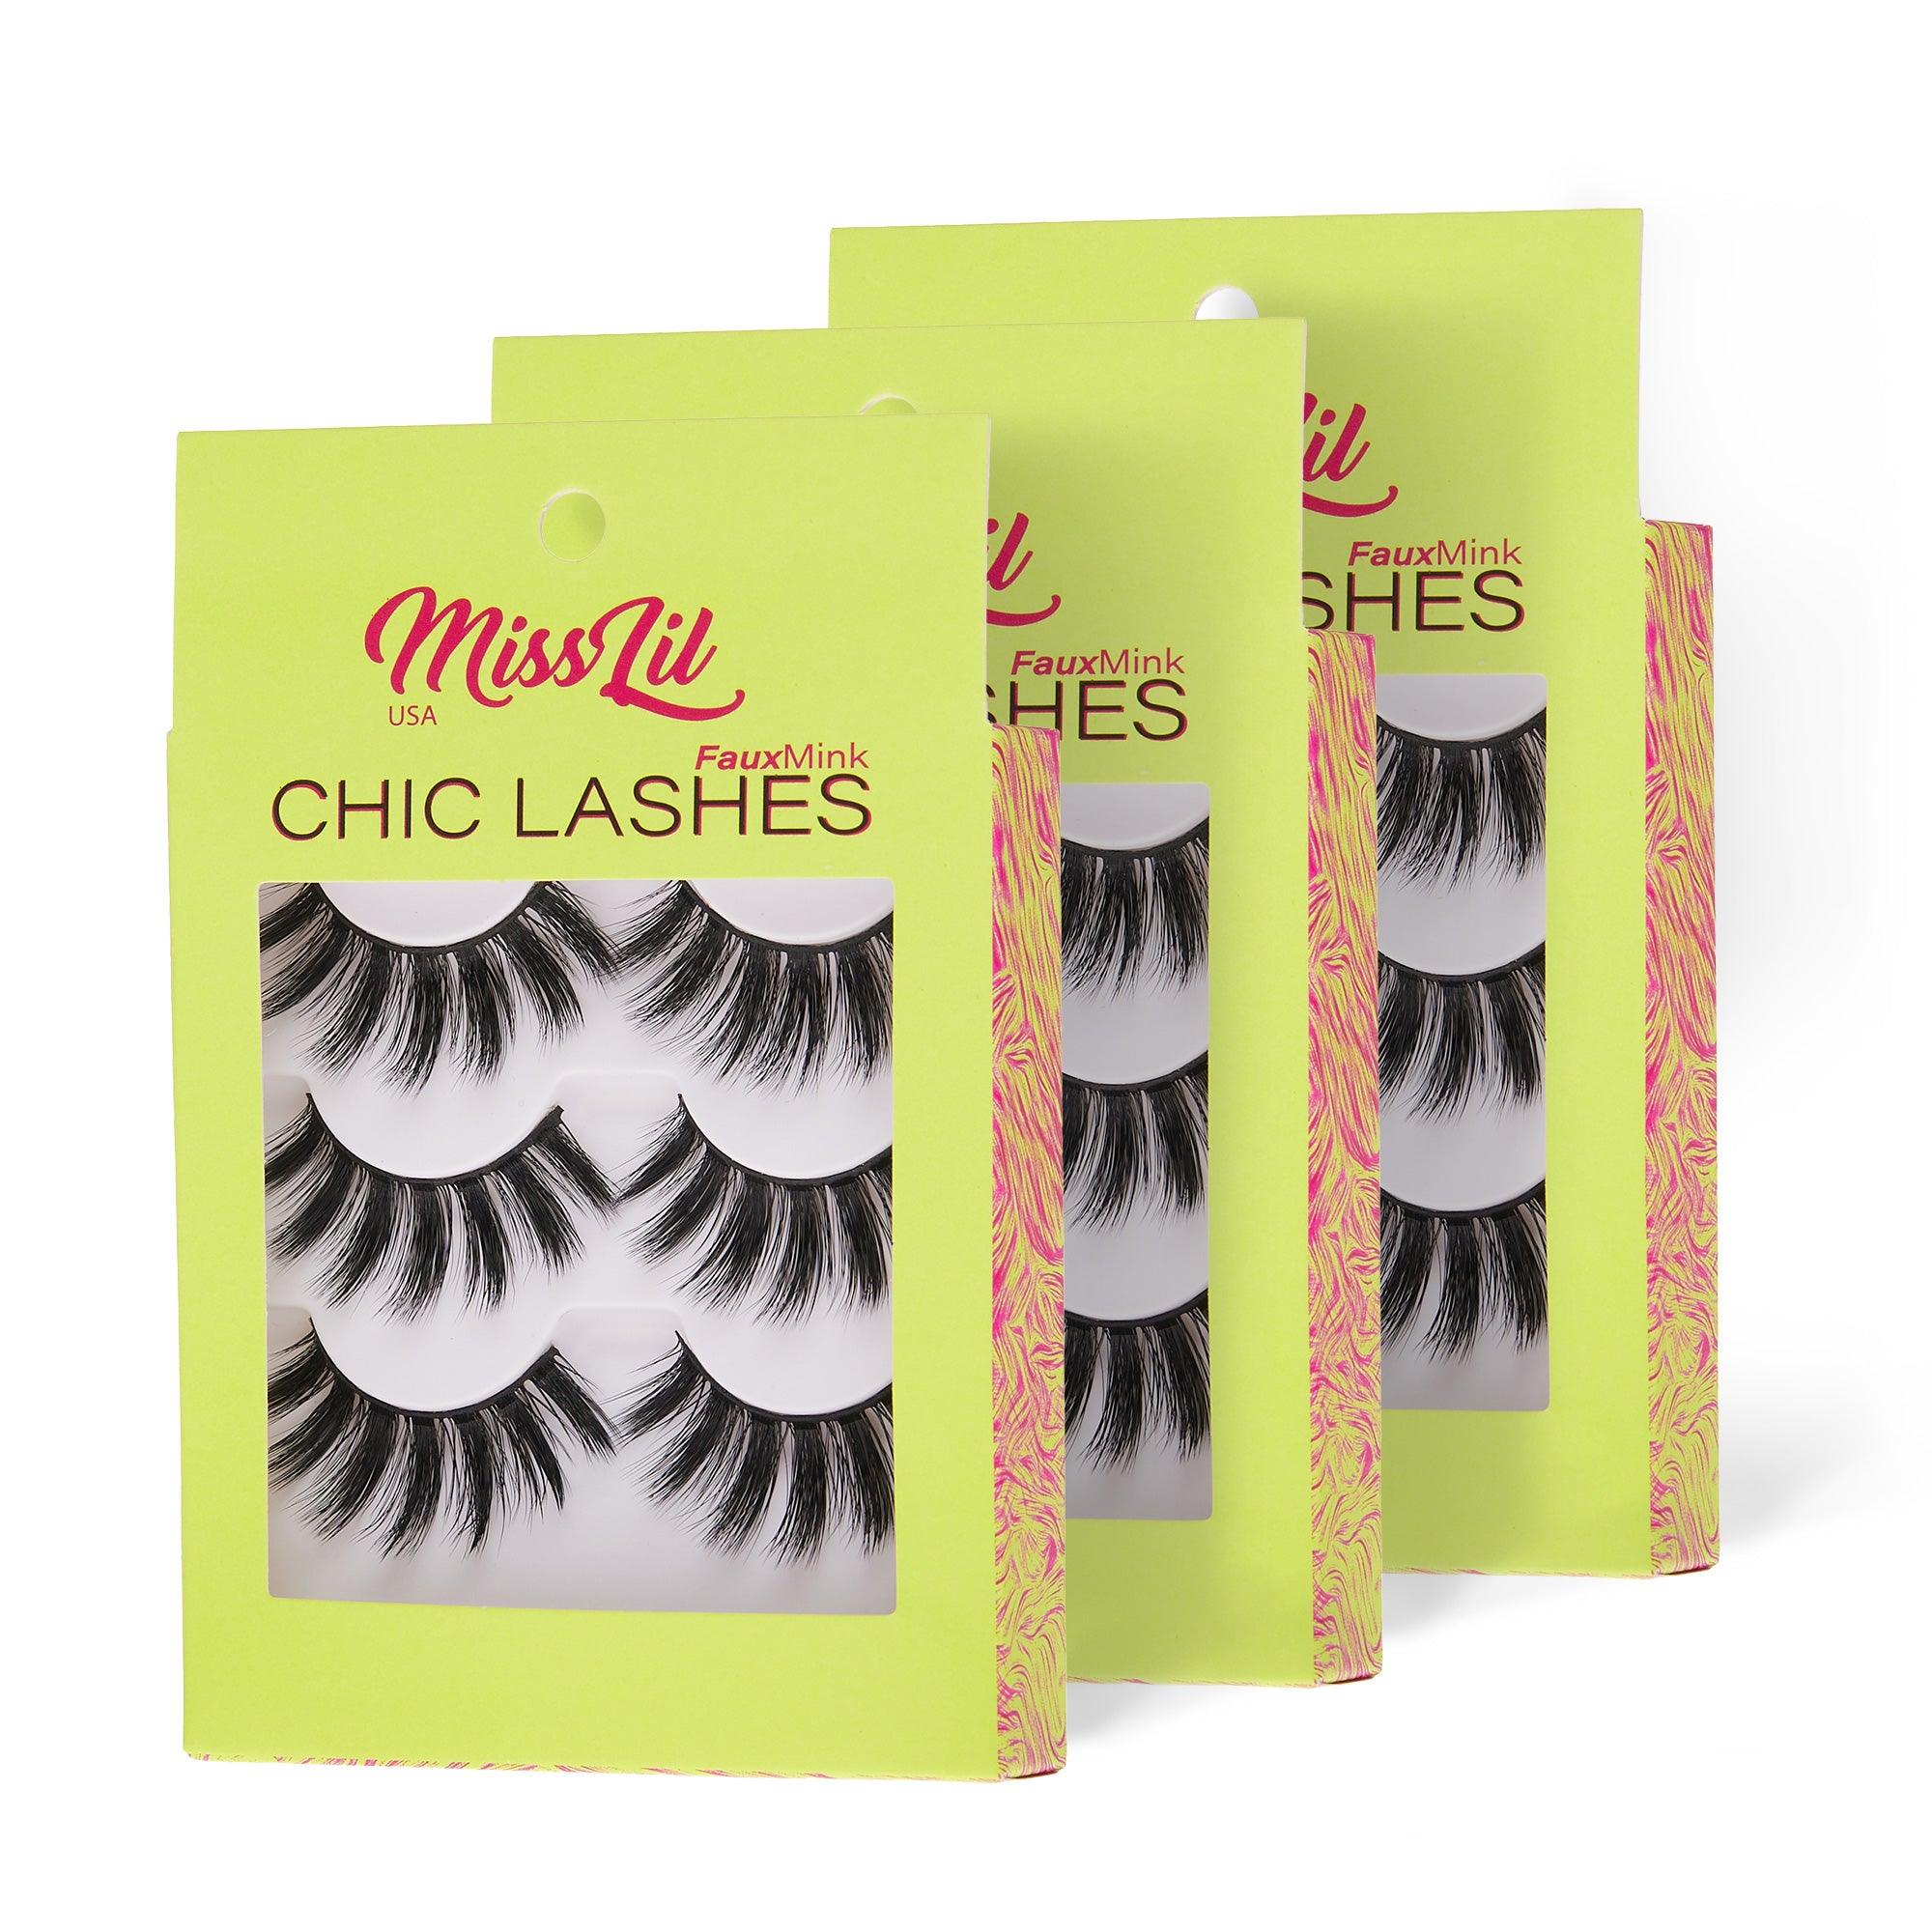 3-Pairs Lashes-Chic Lashes Collection #4 (Pack of 12) - Miss Lil USA Wholesale